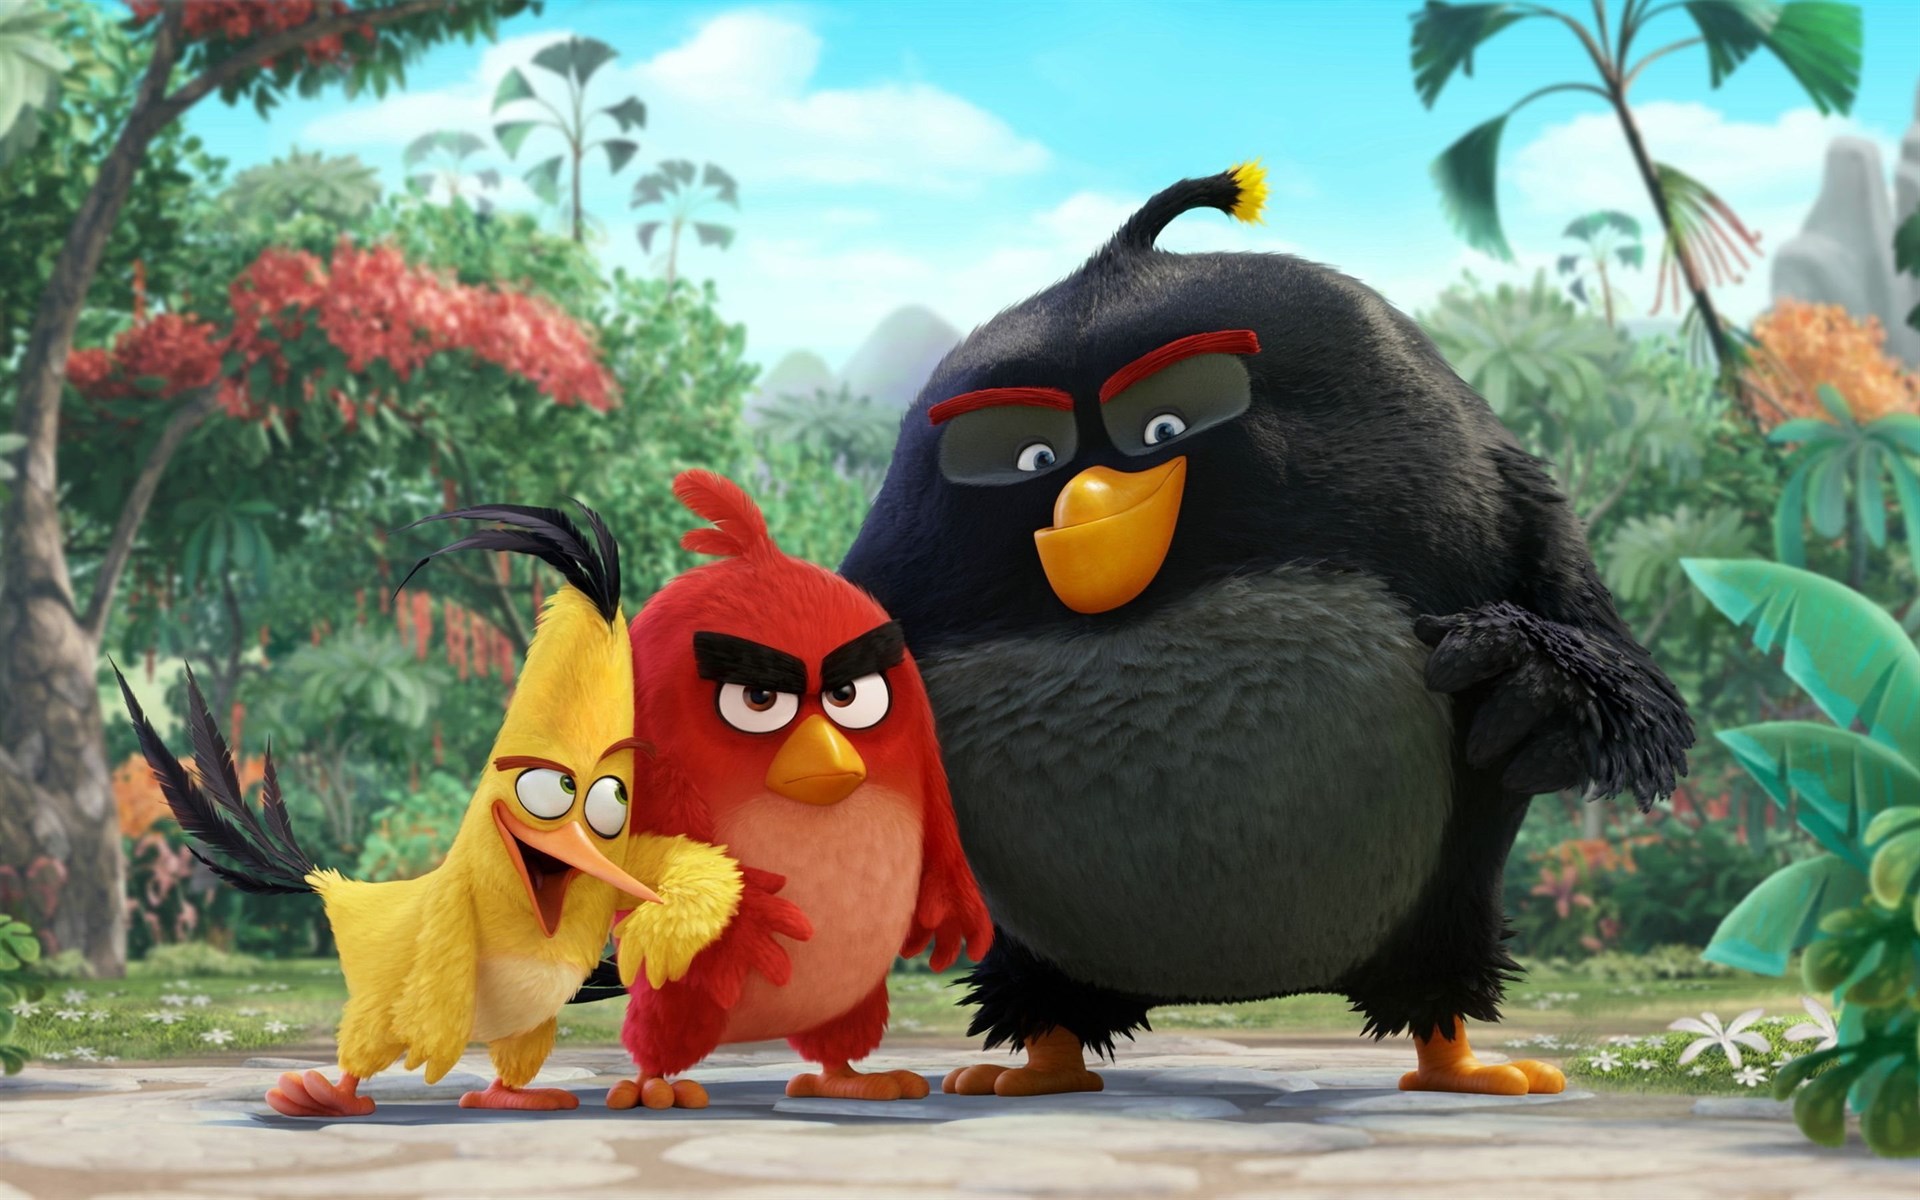 download wallpaper: The Angry Birds Movie – Chuck, Red en Bomb wallpaper